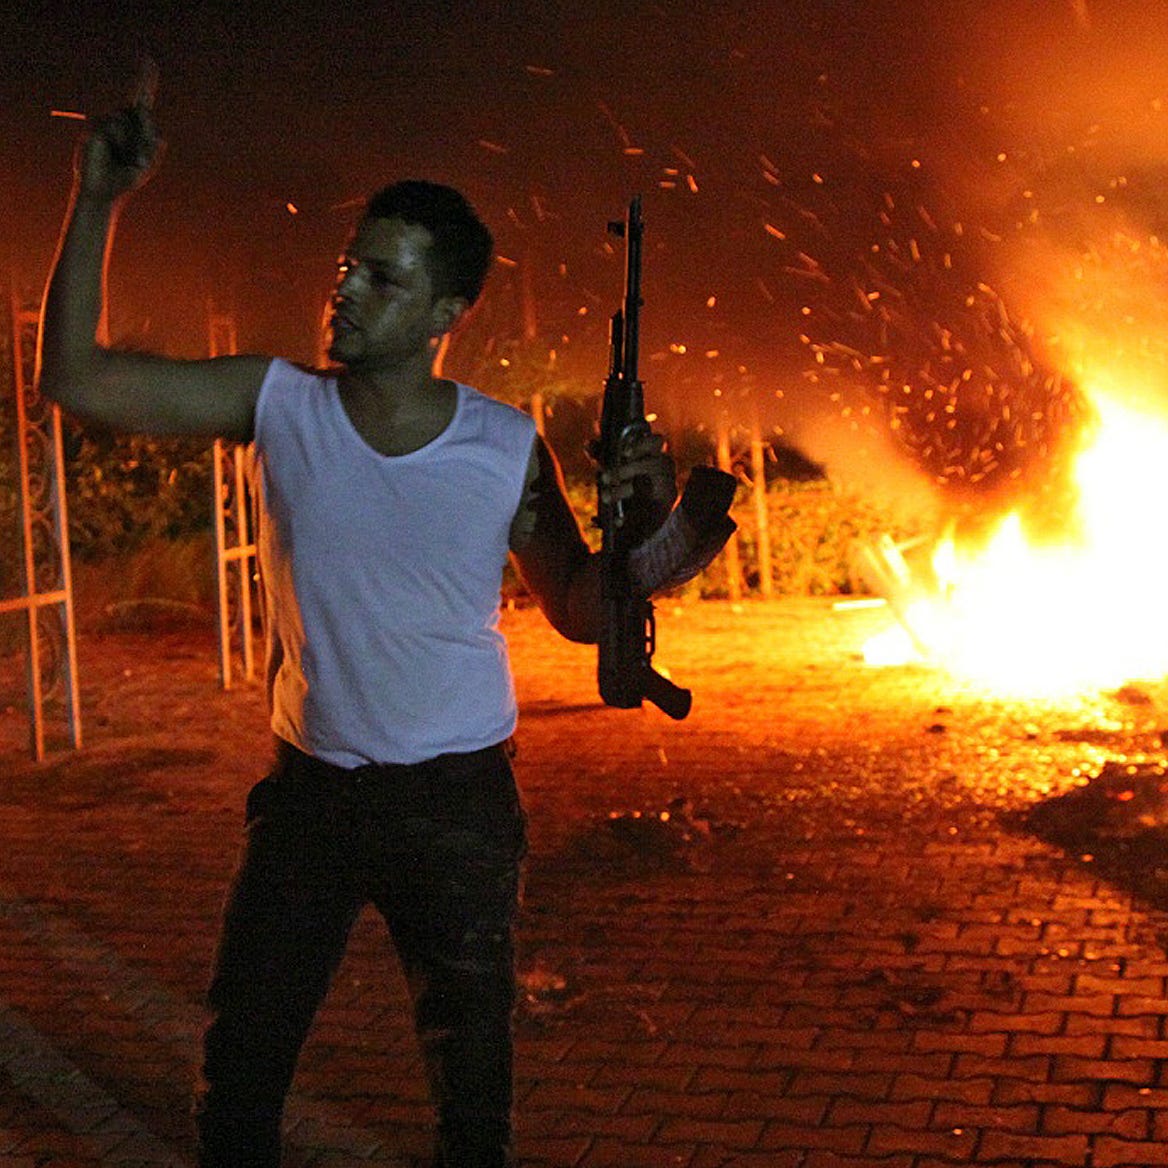 An armed man waves his rifle as buildings and cars are engulfed in flames after being set on fire inside the U.S. consulate compound in Benghazi, Libya late on Sept. 11, 2012.